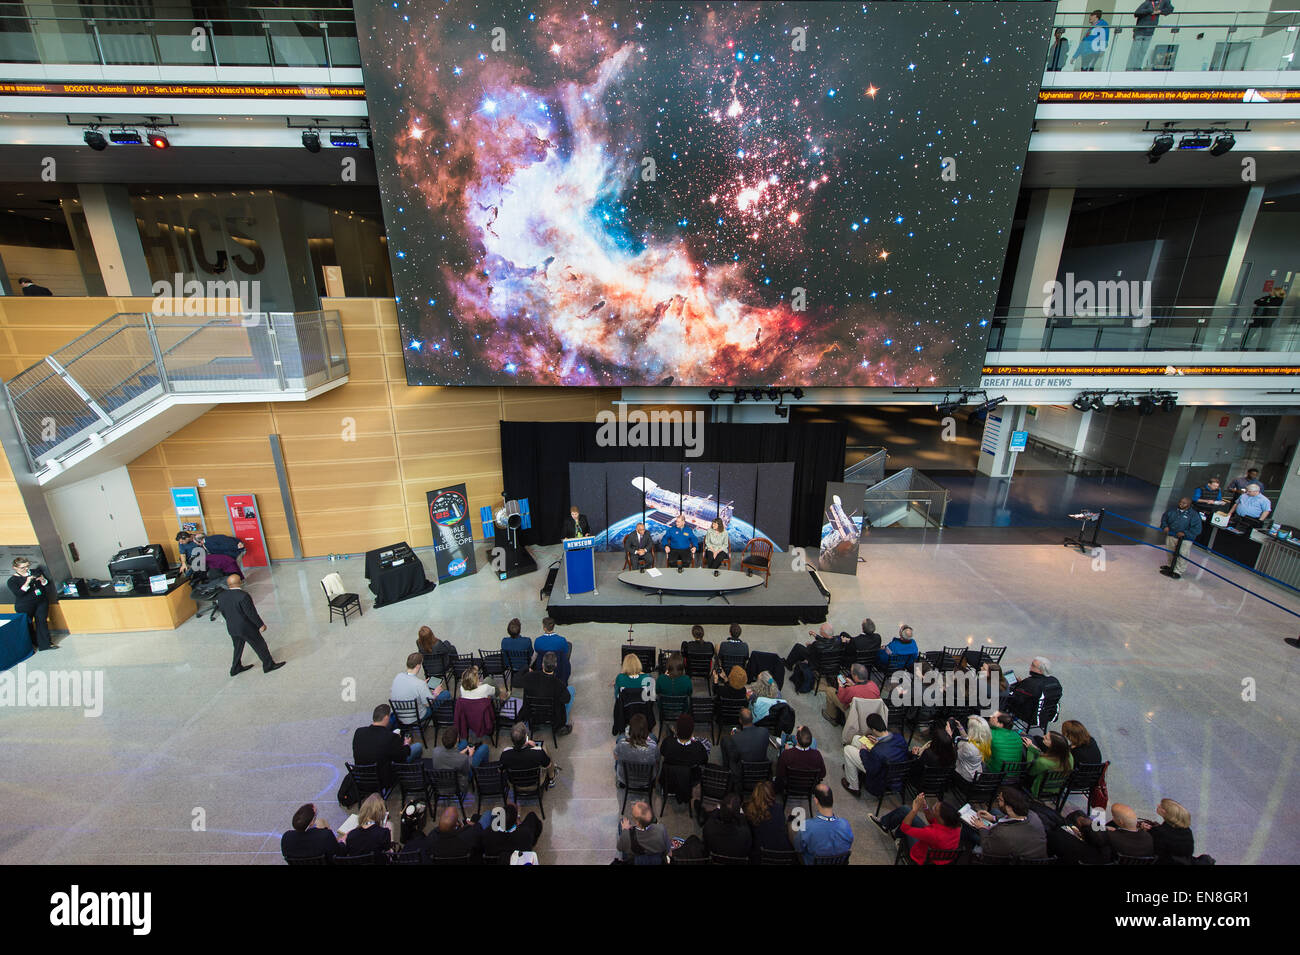 Dr. Kathryn Flanagan, interim director, Space Telescope Science Institute, speaks at the Hubble 25th Anniversary official image debut event on Thursday, April 23, 2015 at the Newseum in Washington, DC. The official image from Hubble's near-infrared Wide Field Camera 3 is of a two million year old cluster of about 3,000 stars called Westerlund 2, named after the astronomer who discovered it in the 1960s. Westerlund 2 is located in the constellation Carina about 20,000 light-years away from Earth. Stock Photo